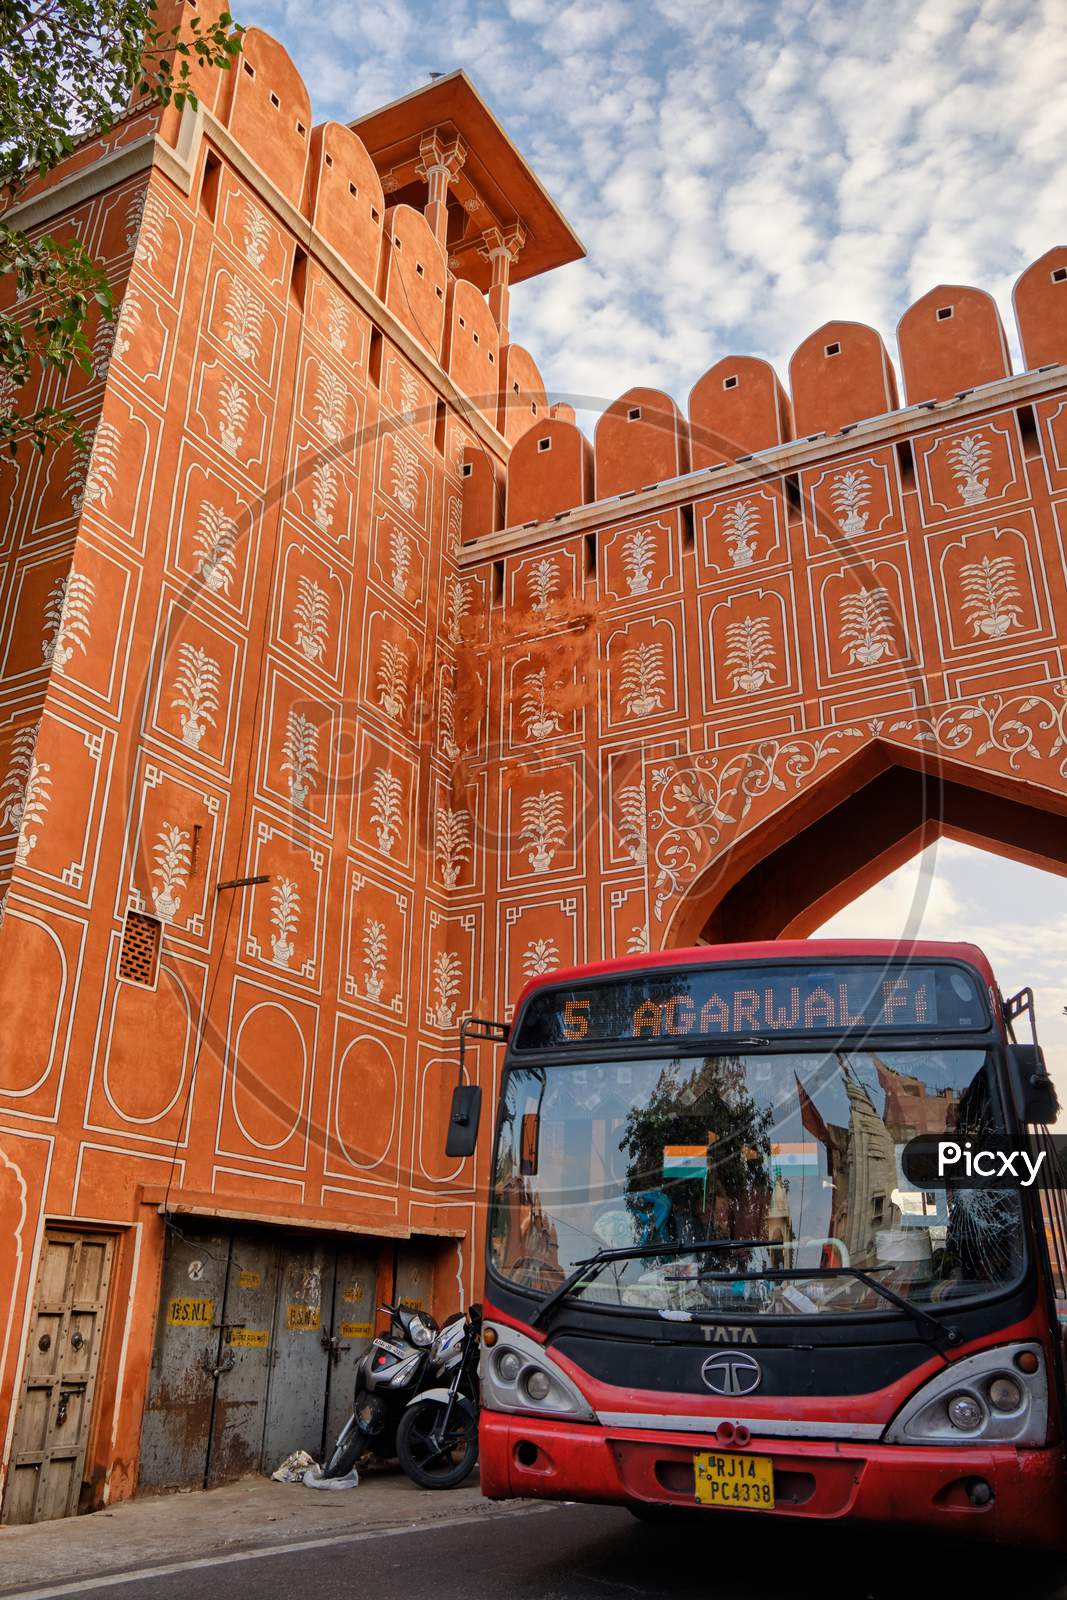 Public Bus Passes Through The Chandpole Gate Of The Walled City Of Jaipur, Pink City In India